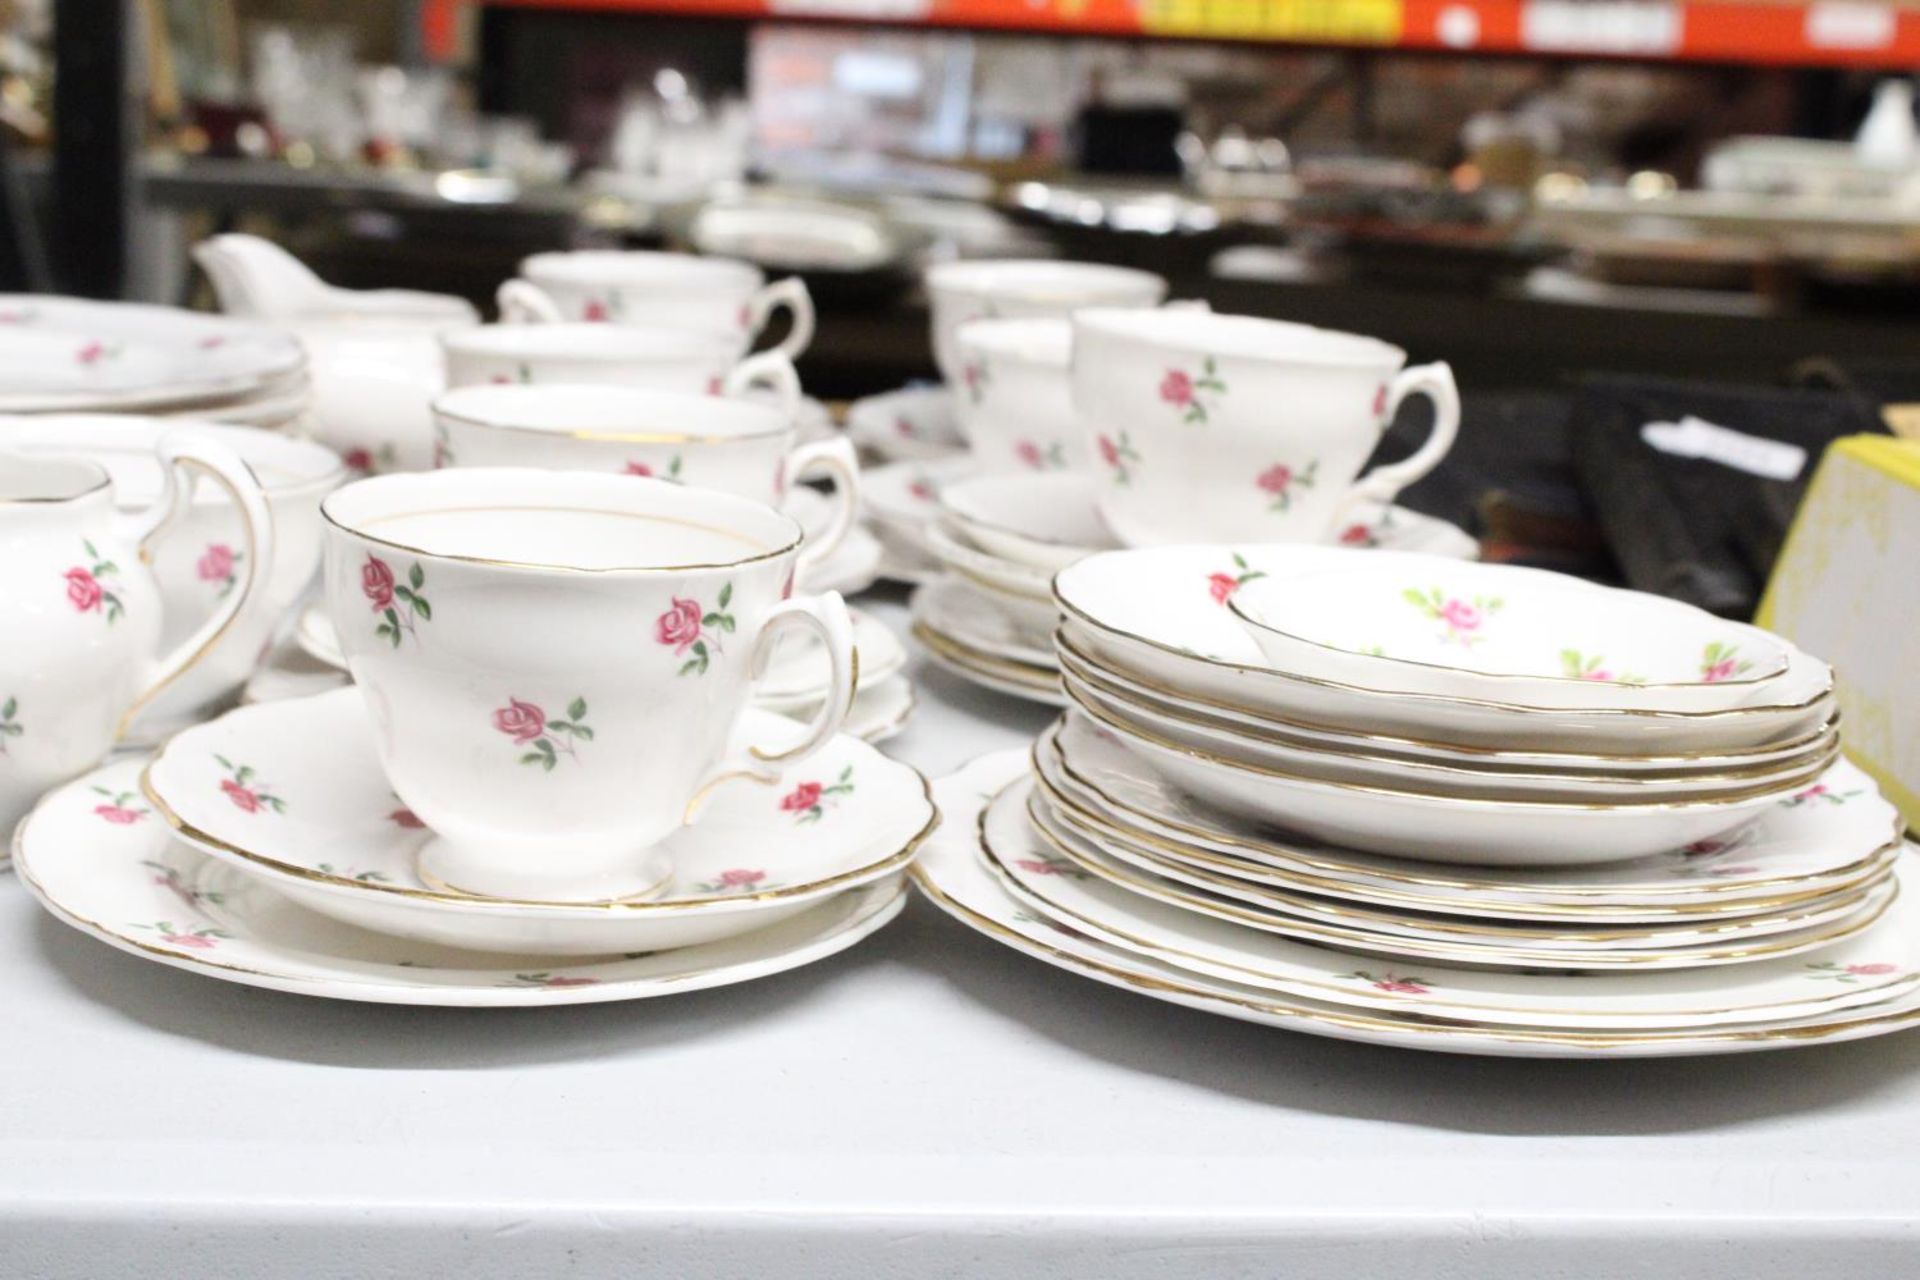 A VINTAGE COLCLOUGH CHINA TEASET, WITH ROSE PATTERN TO INCLUDE PLATES, CREAM JUGS, A SUGAR BOWL, - Image 5 of 5